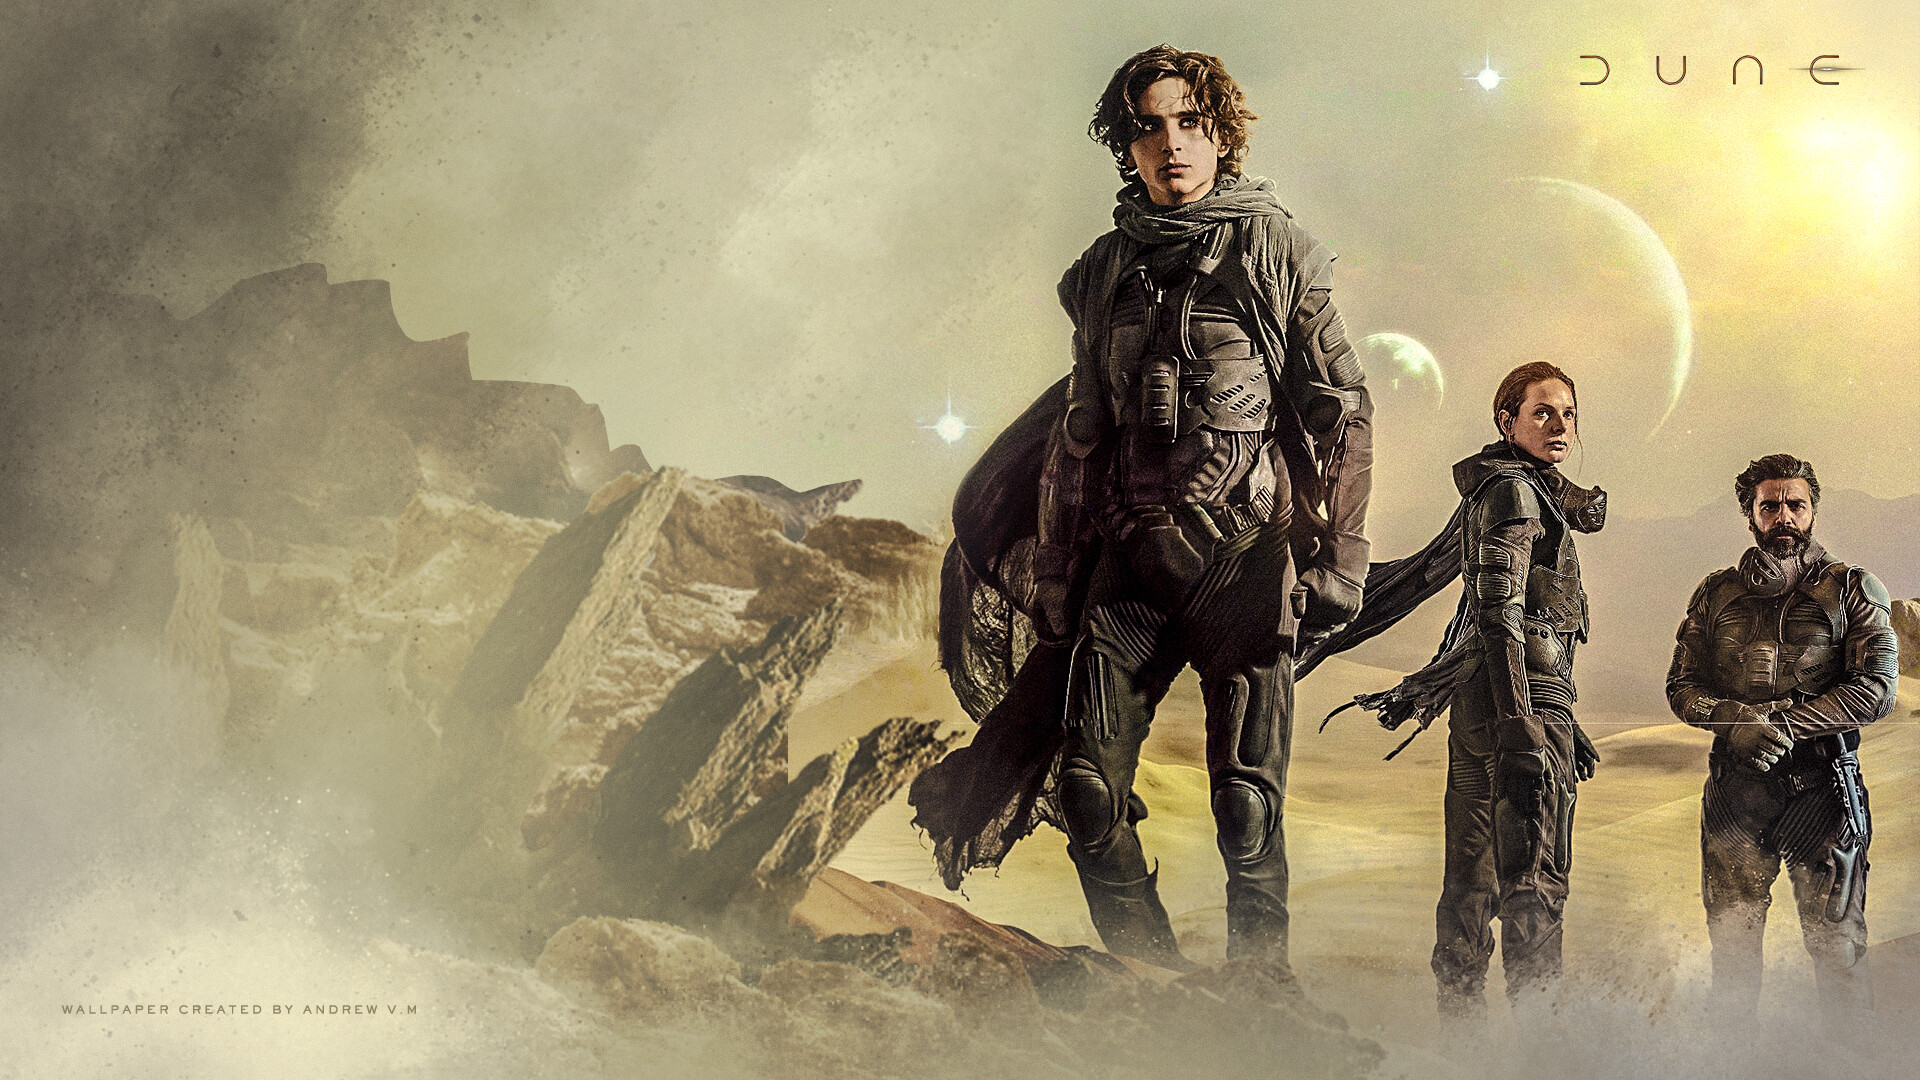 Dune: Part One: Paul Atreides, a brilliant and gifted young man born into a great destiny beyond his understanding, must travel to the most dangerous planet in the universe to ensure the future of his family and his people, Sci-fi. 1920x1080 Full HD Background.